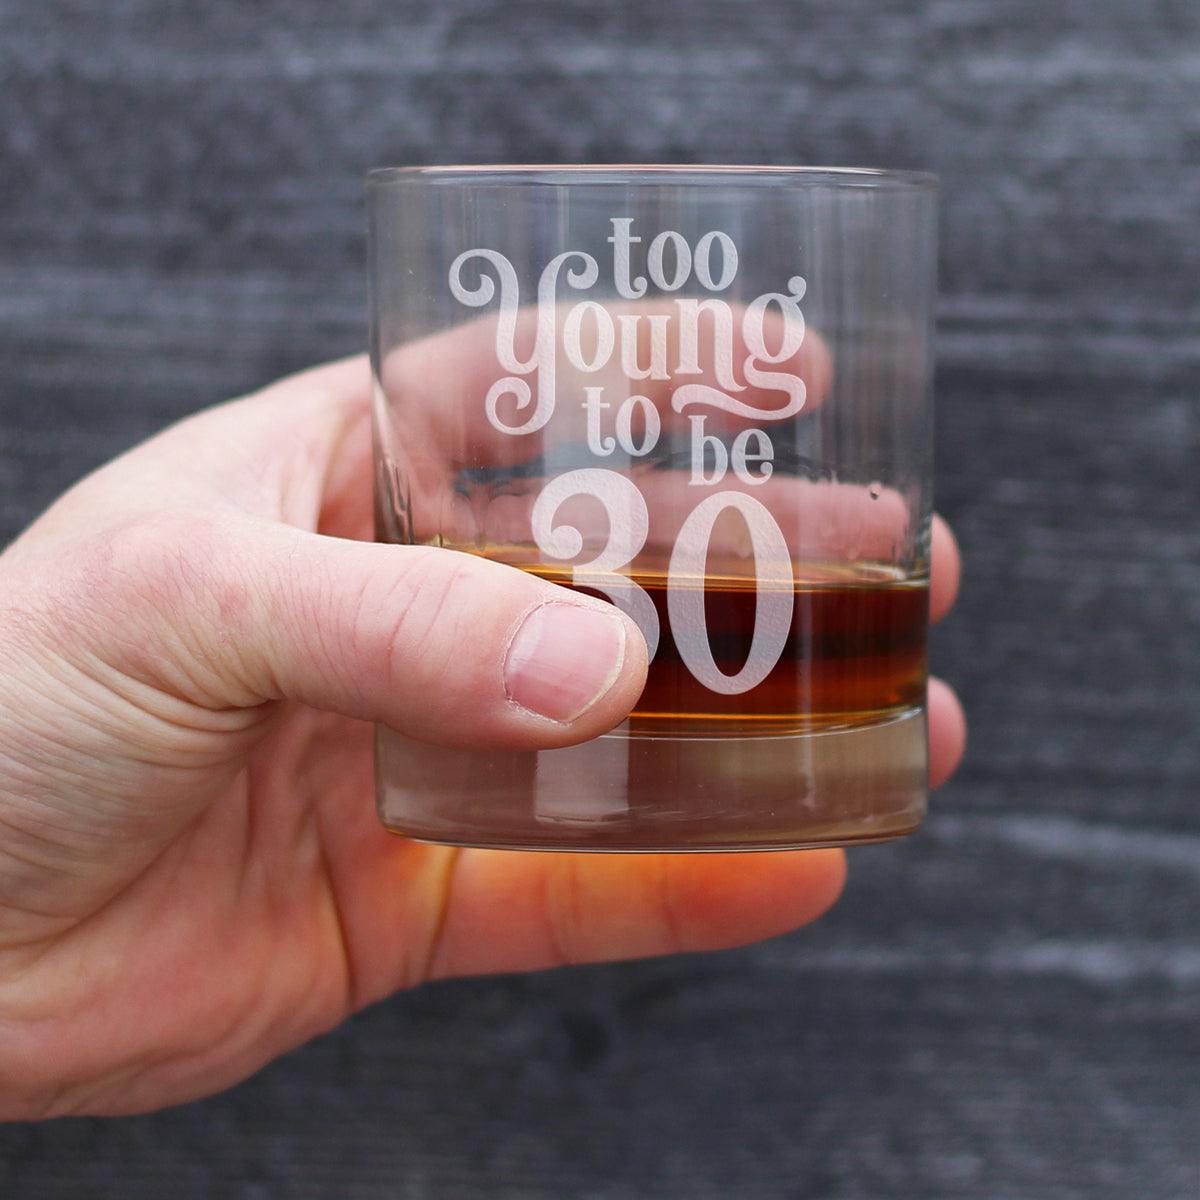 Too Young to be 30 - Funny 30th Birthday Whiskey Rocks Glass Gifts for Men &amp; Women Turning 30 - Whisky Drinking Tumbler